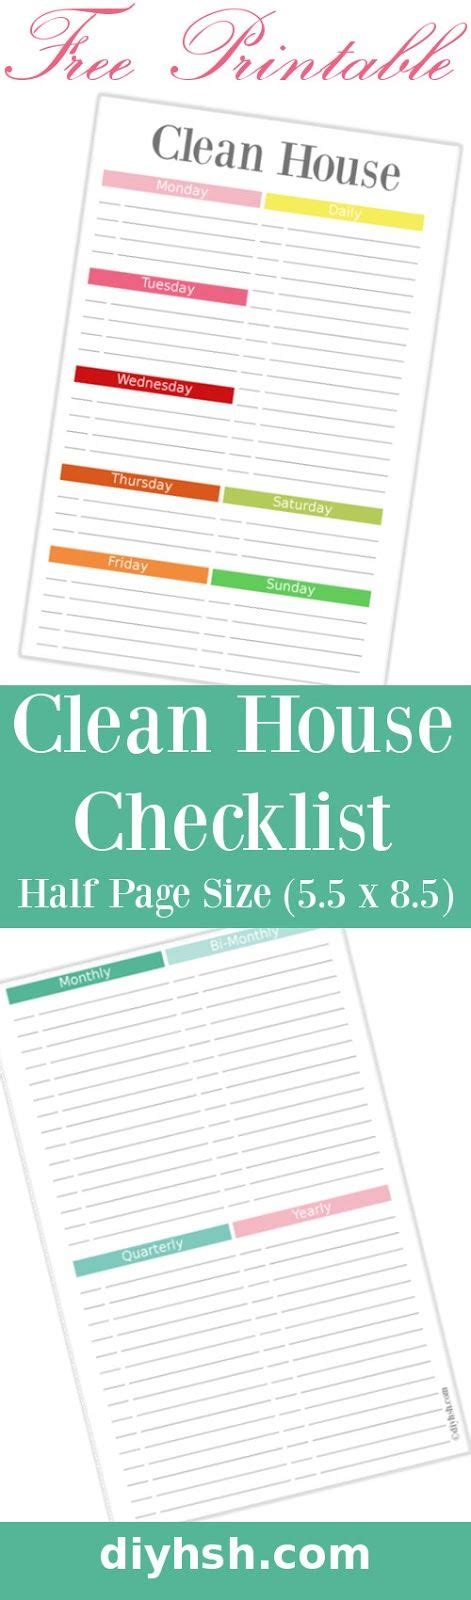 Download these free printable inspirational quote bookmarks, print them on cardstock paper and enjoy! Clean House Checklist - Free Printable (5.5 x 8.5) | House cleaning checklist, Clean house, Cleaning